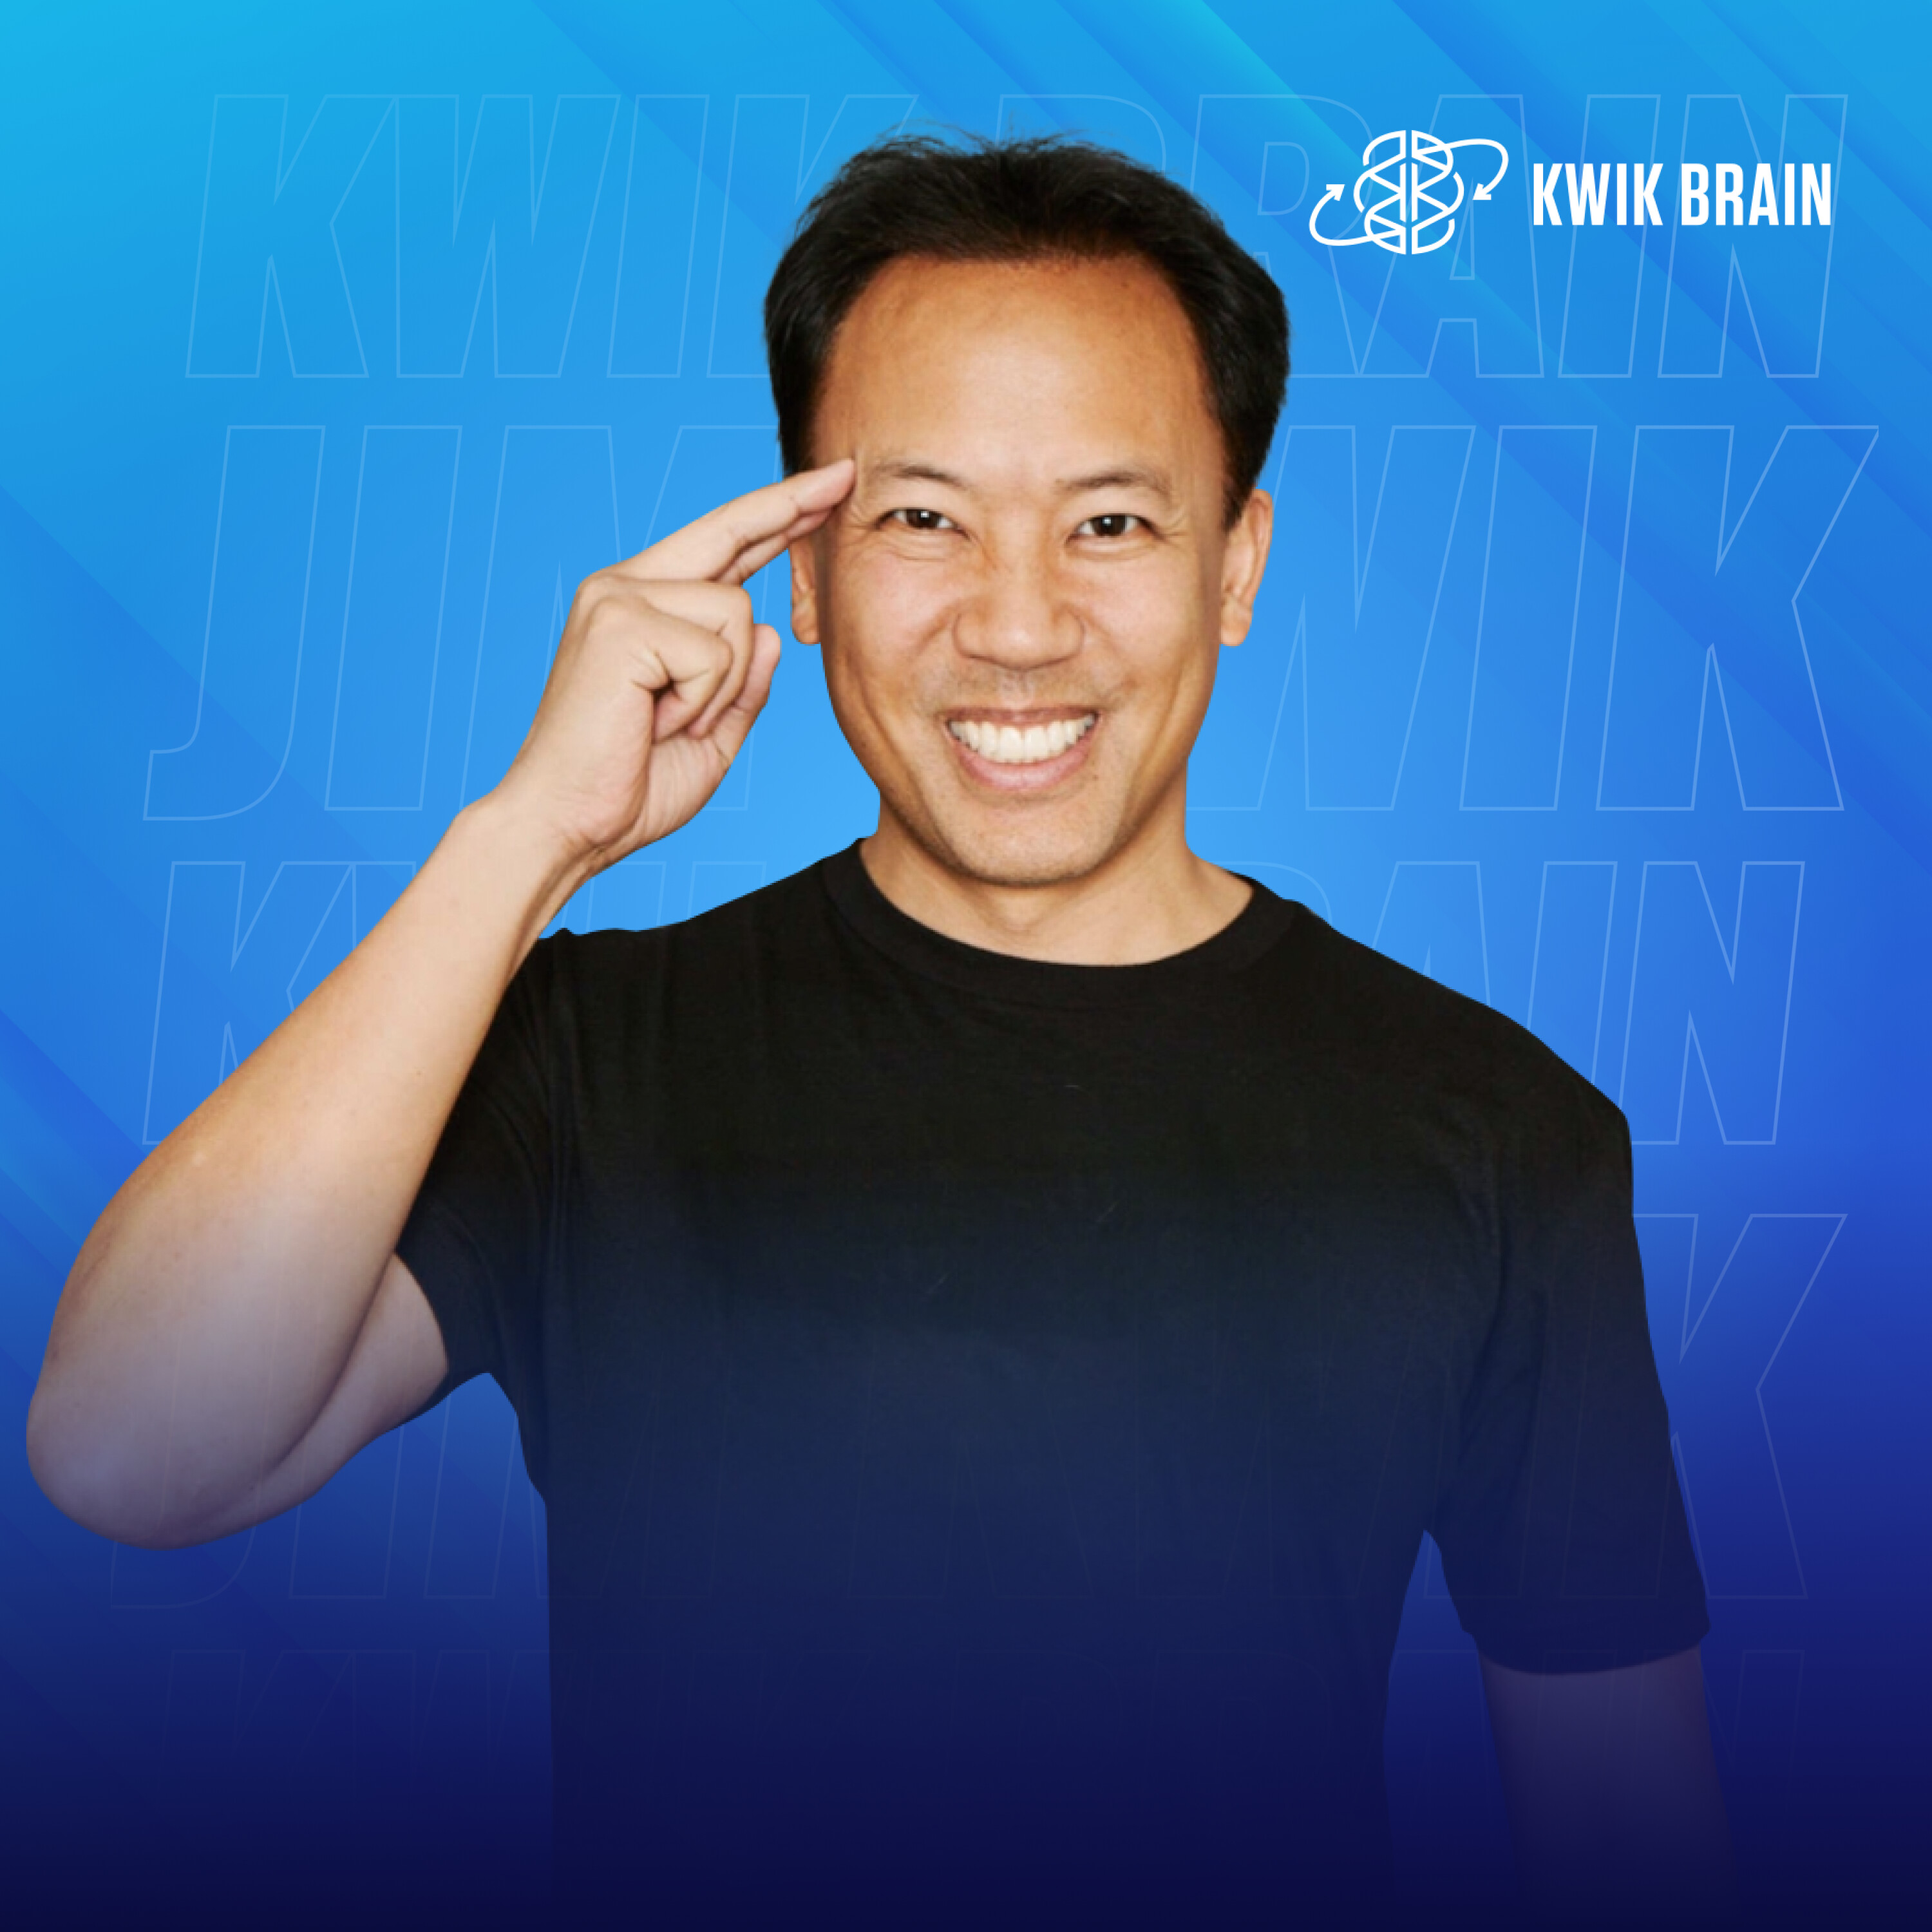 5 Ways to Upgrade Your Brain Potential with Jim Kwik